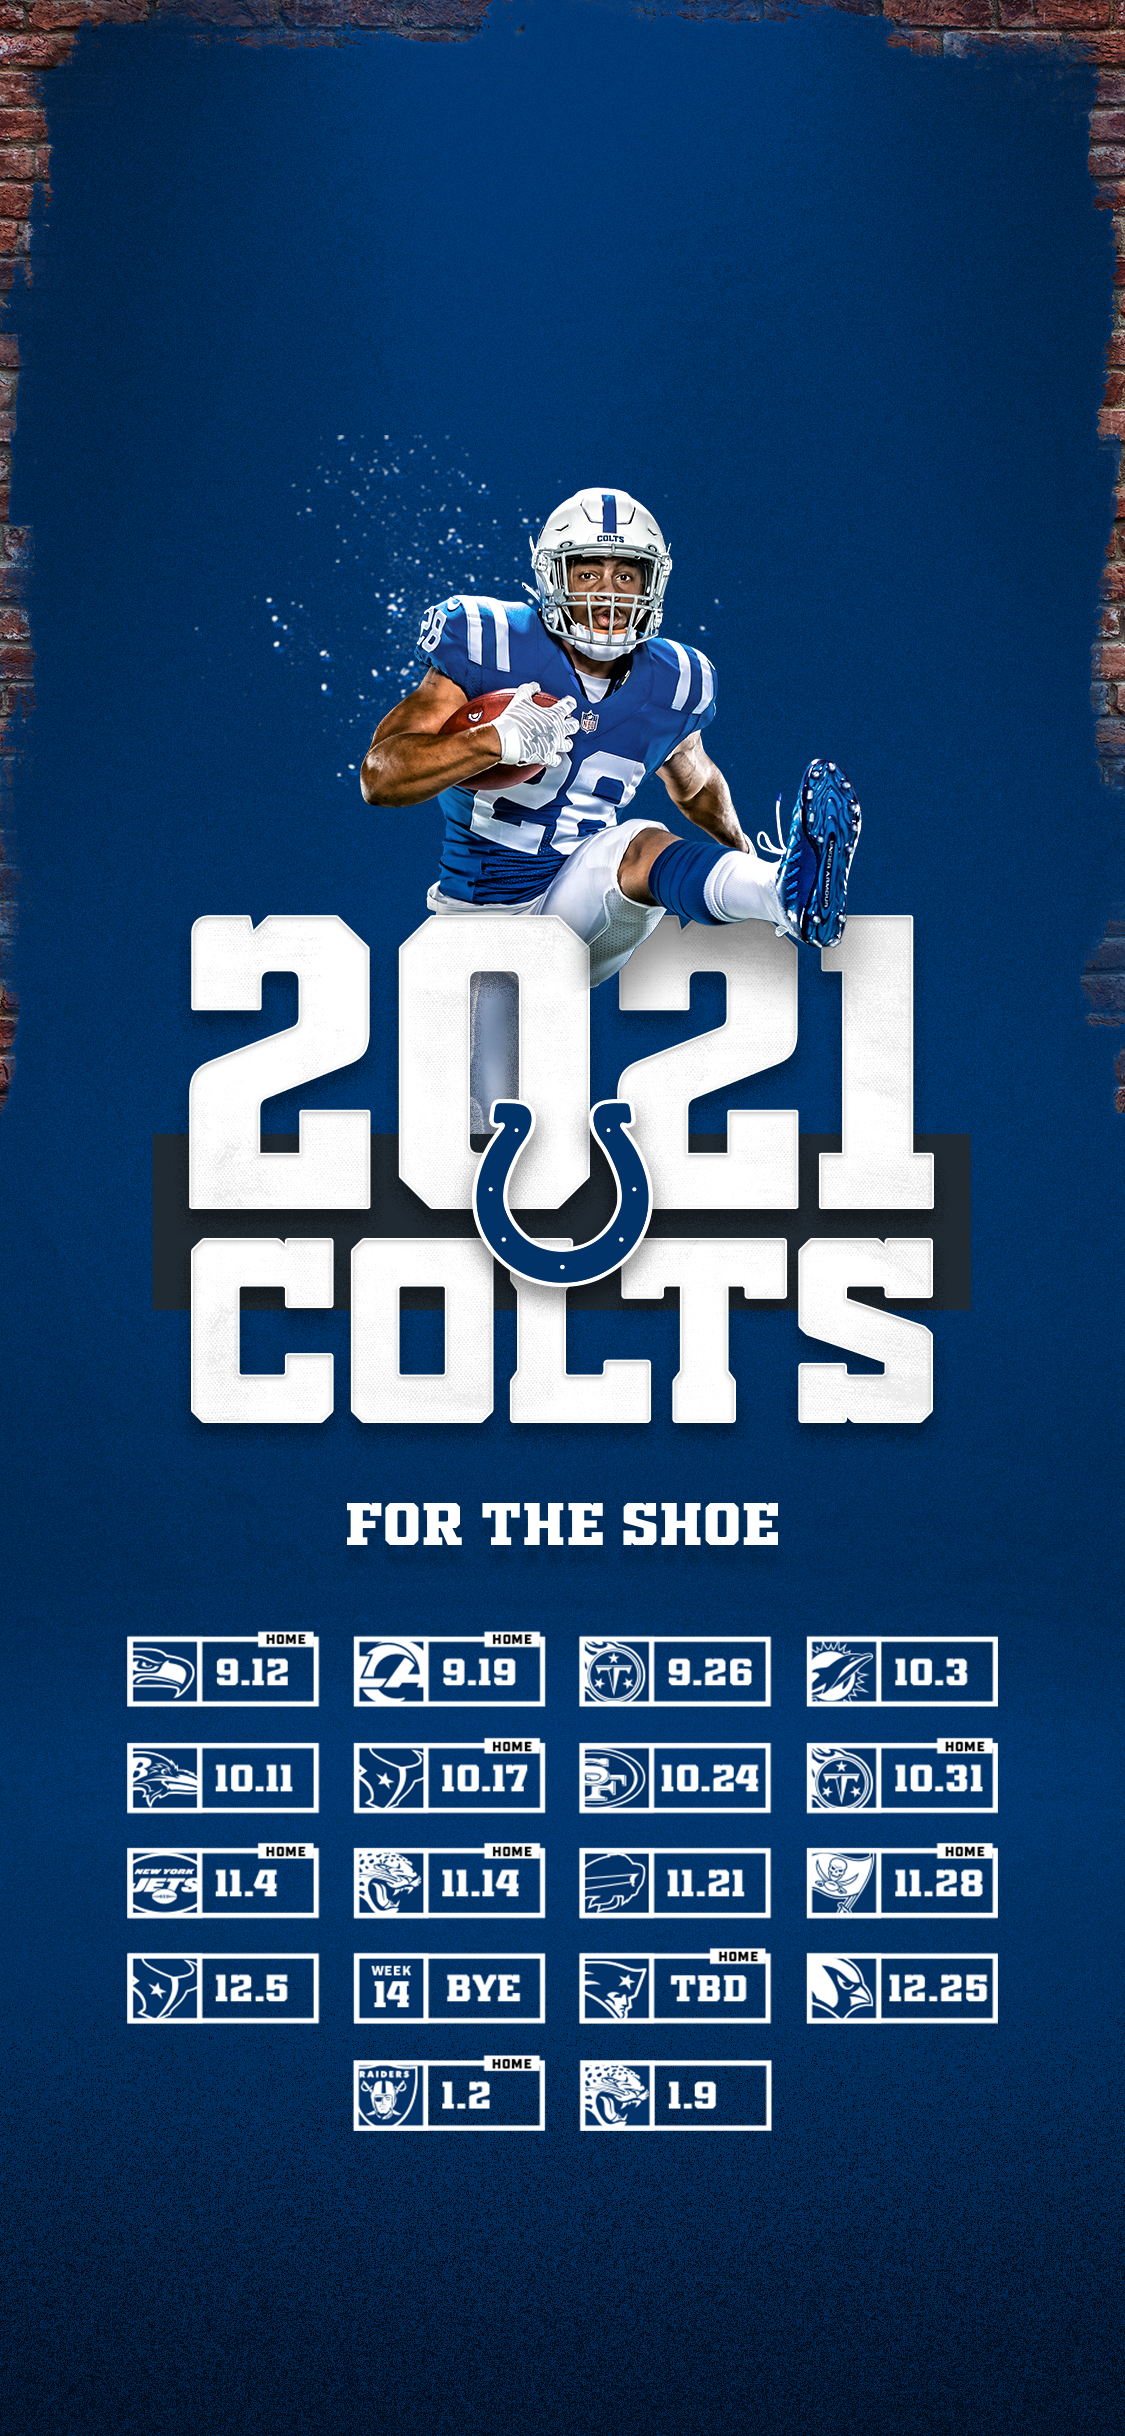 Indy Colts 2022 Schedule Colts Schedule | Indianapolis Colts - Colts.com